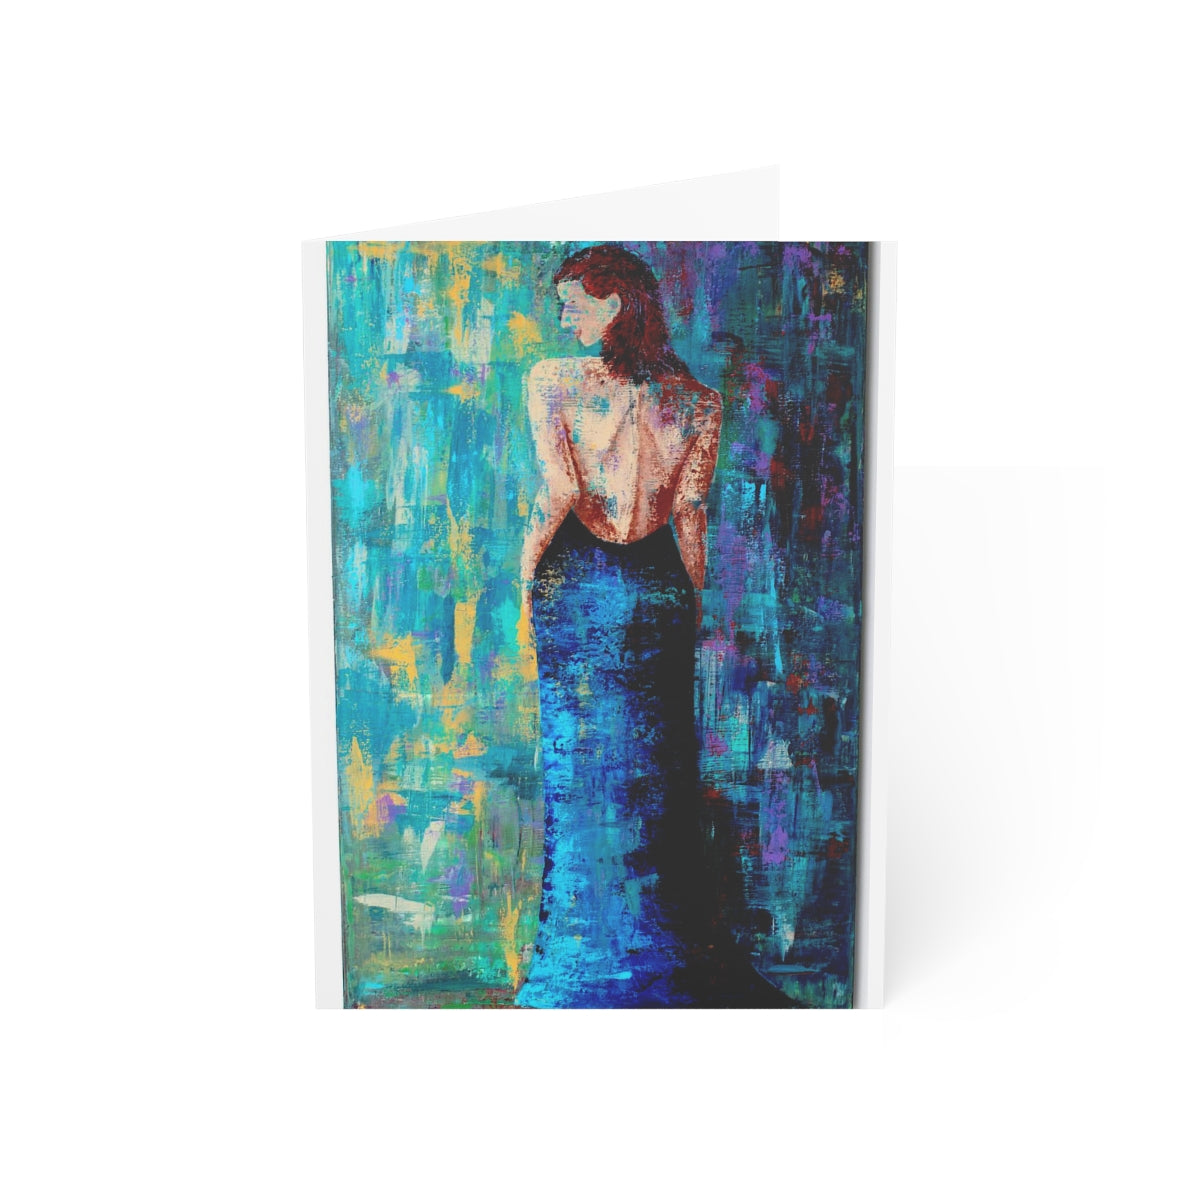 Greeting Cards - Folded with Envelope - Lady in Blue.